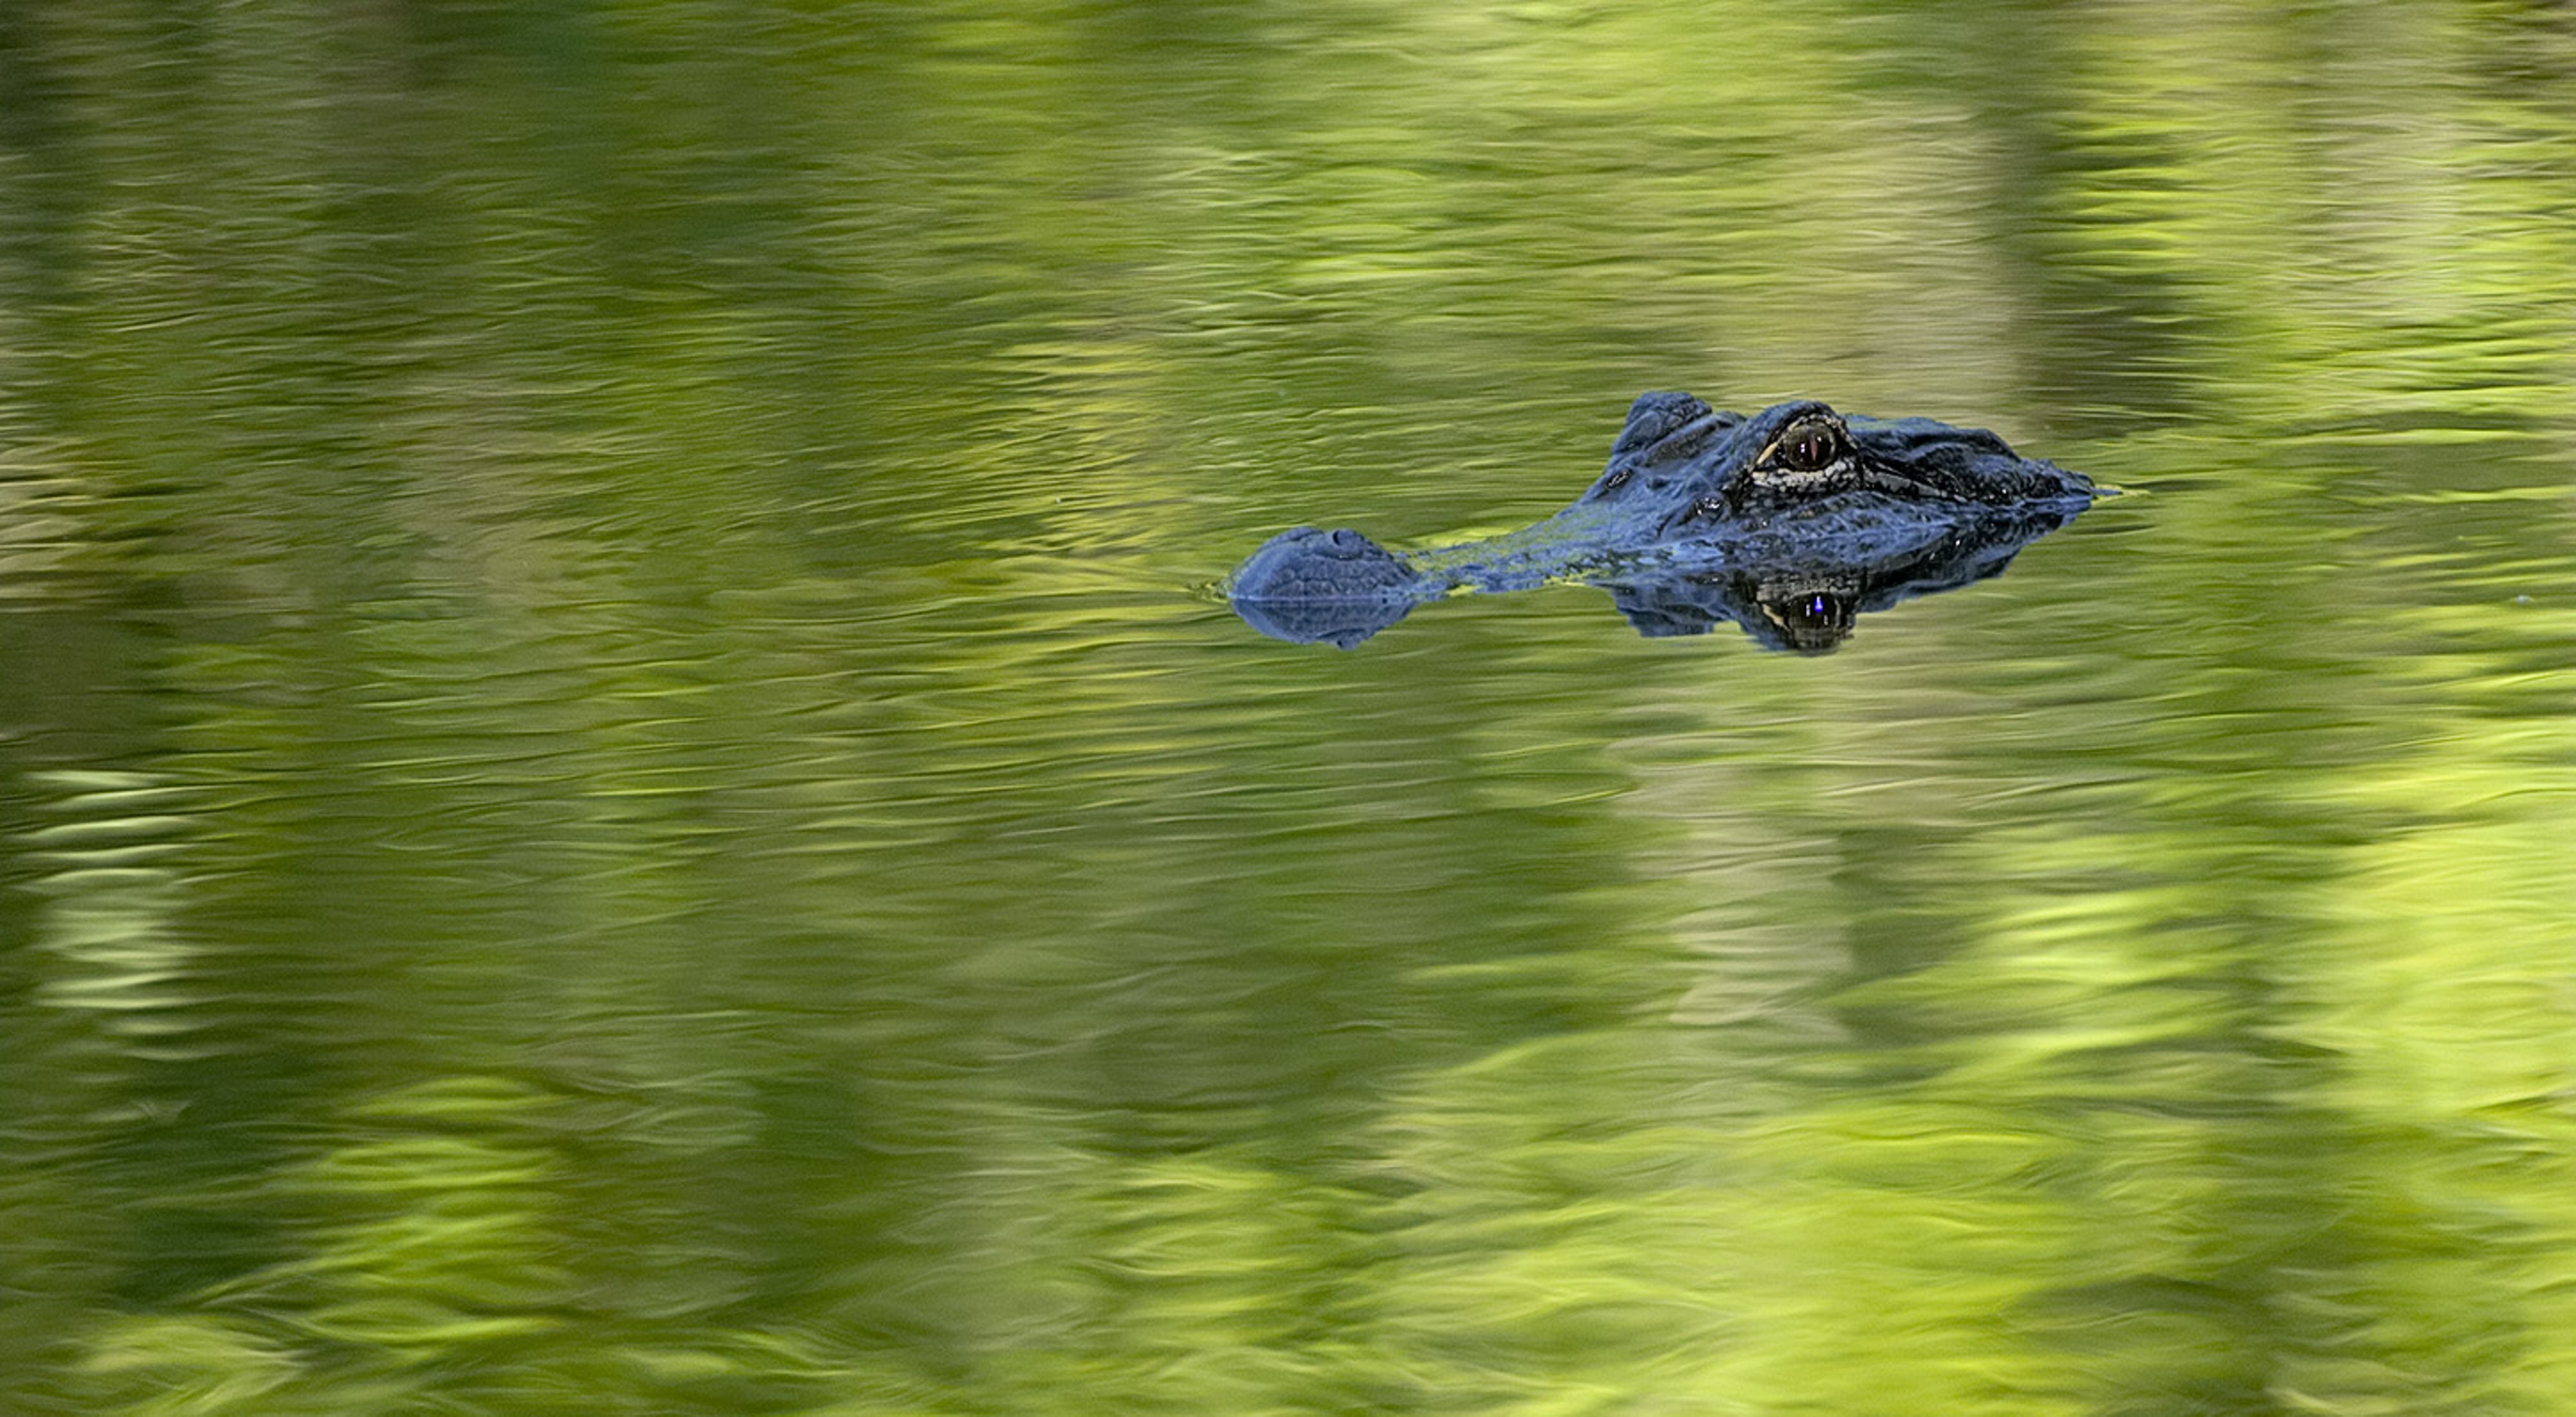 Two eyes of an alligator float above the water's surface.